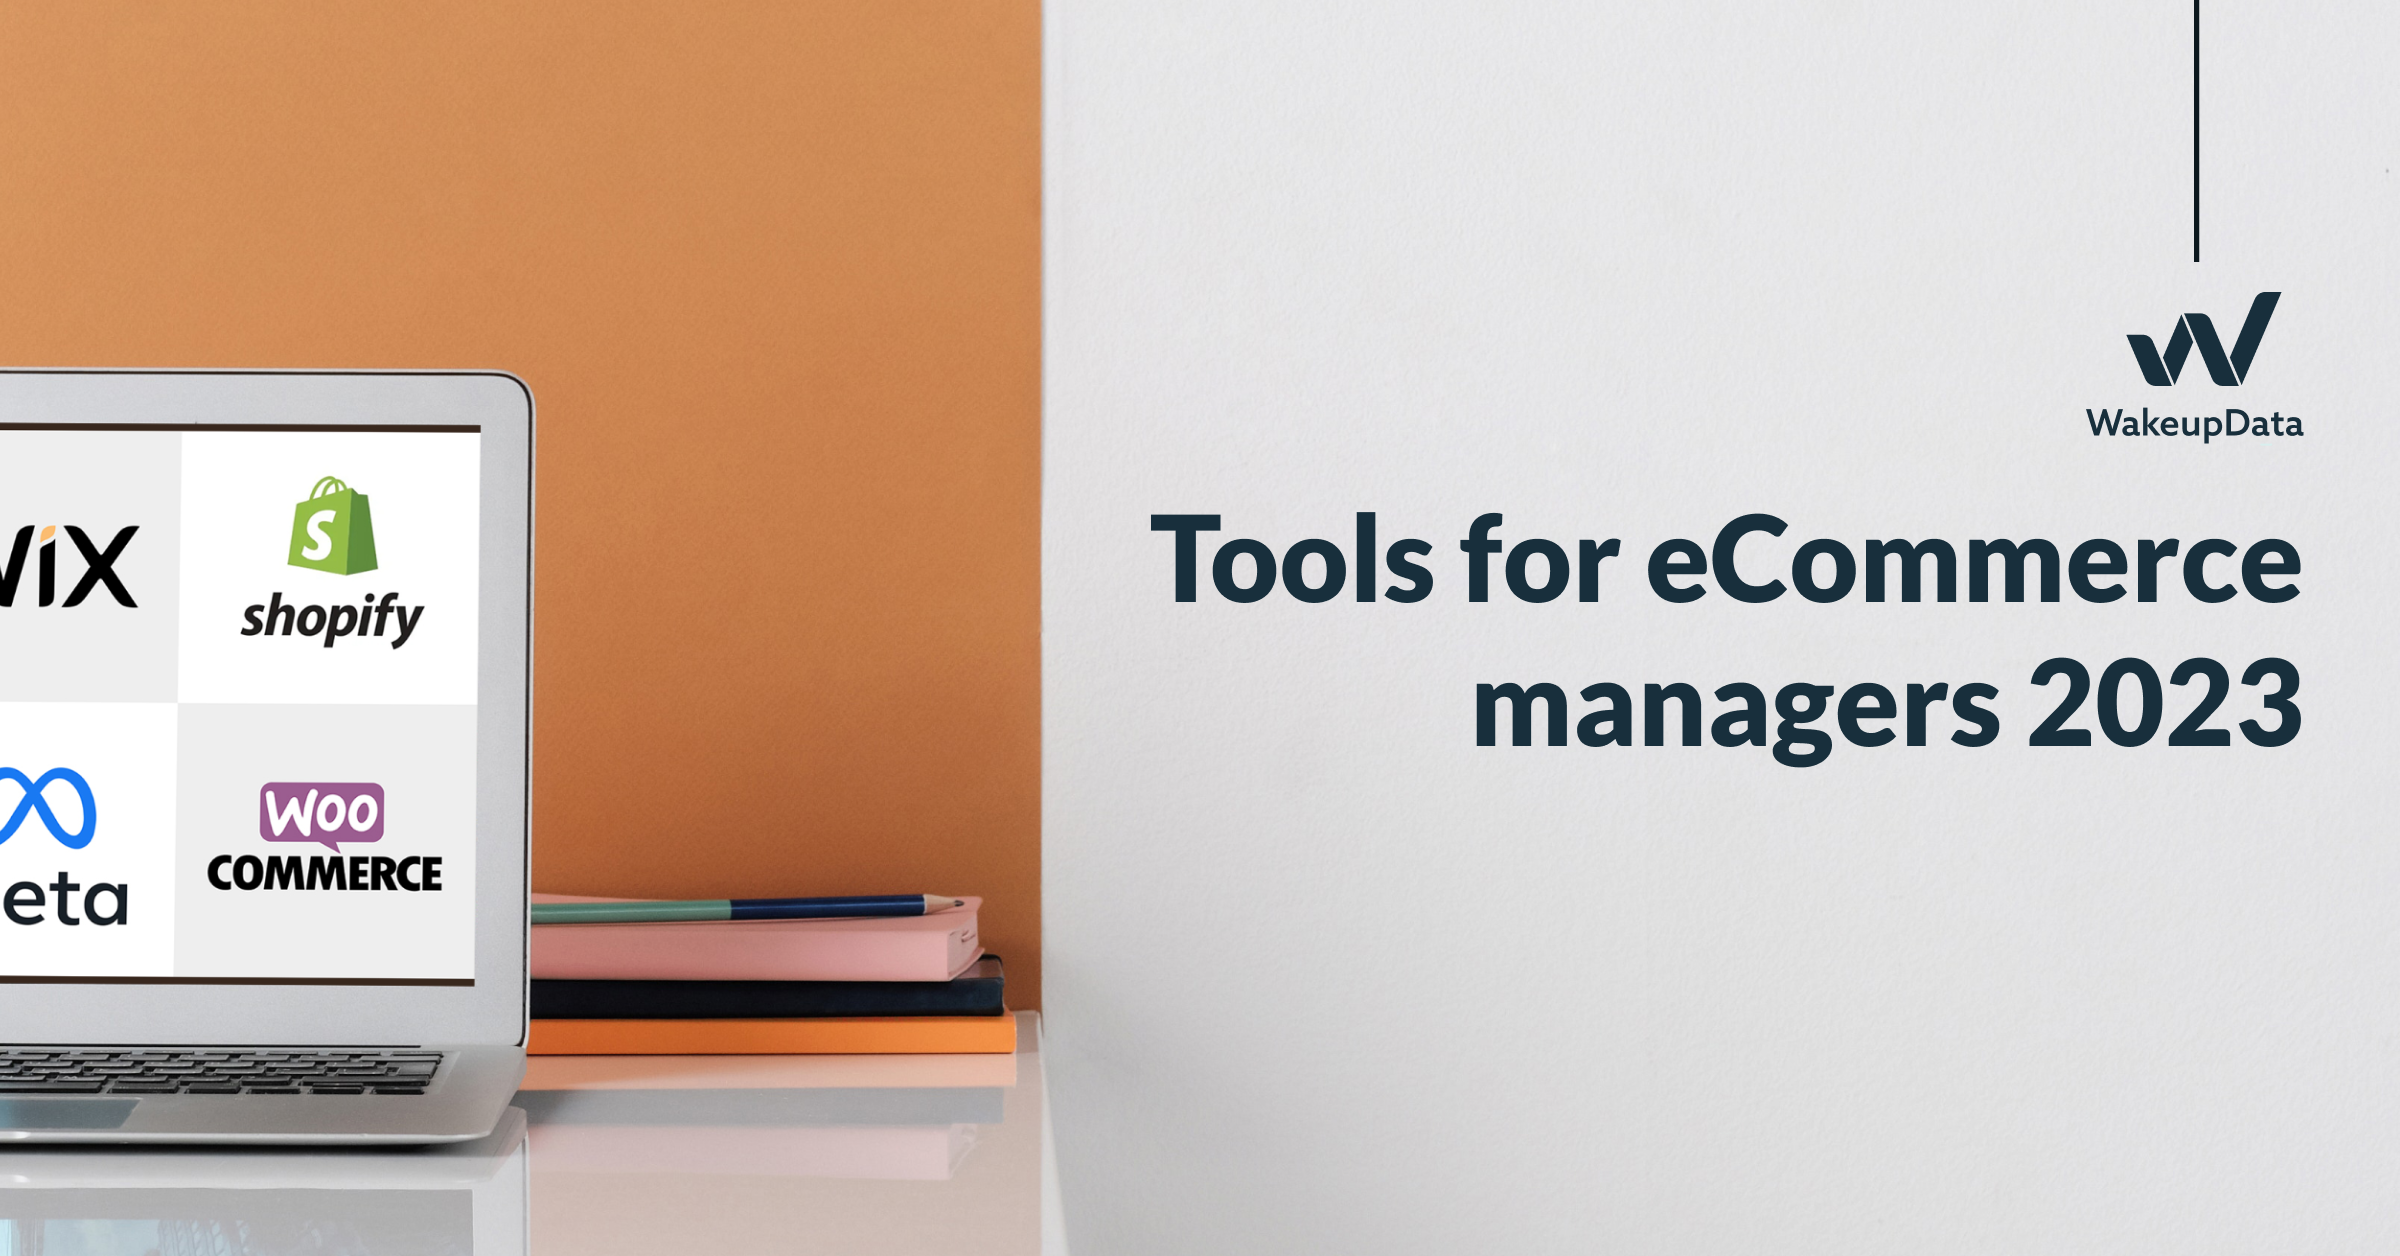 Tools for eCommerce managers 2023